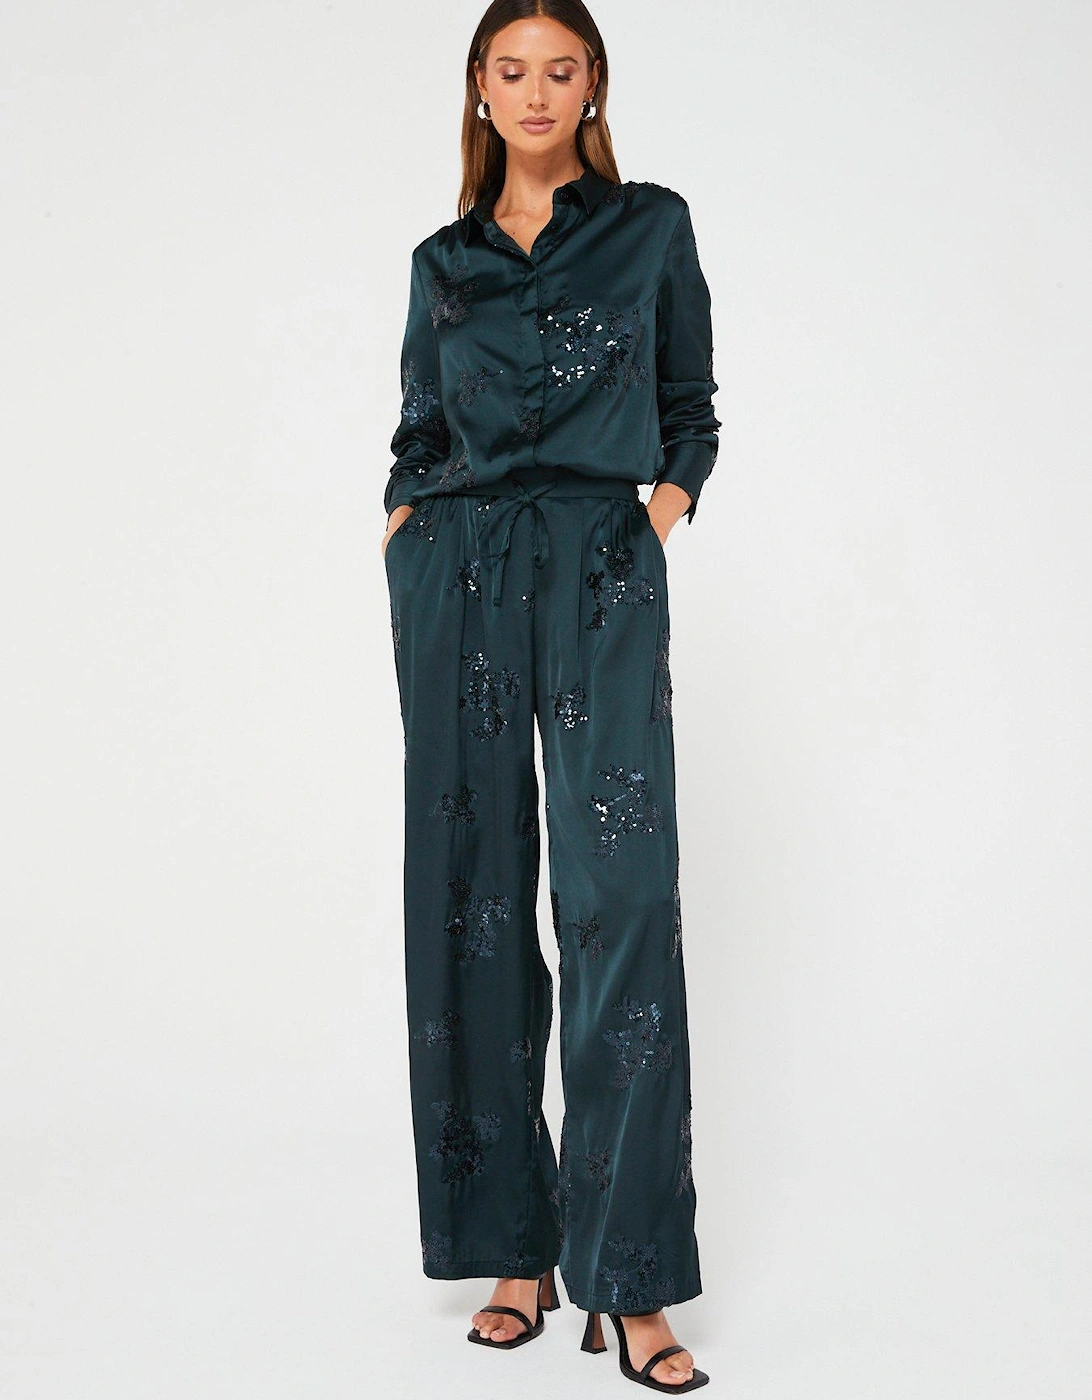 Satin Sequin Co-ord Trousers - Dark Green 